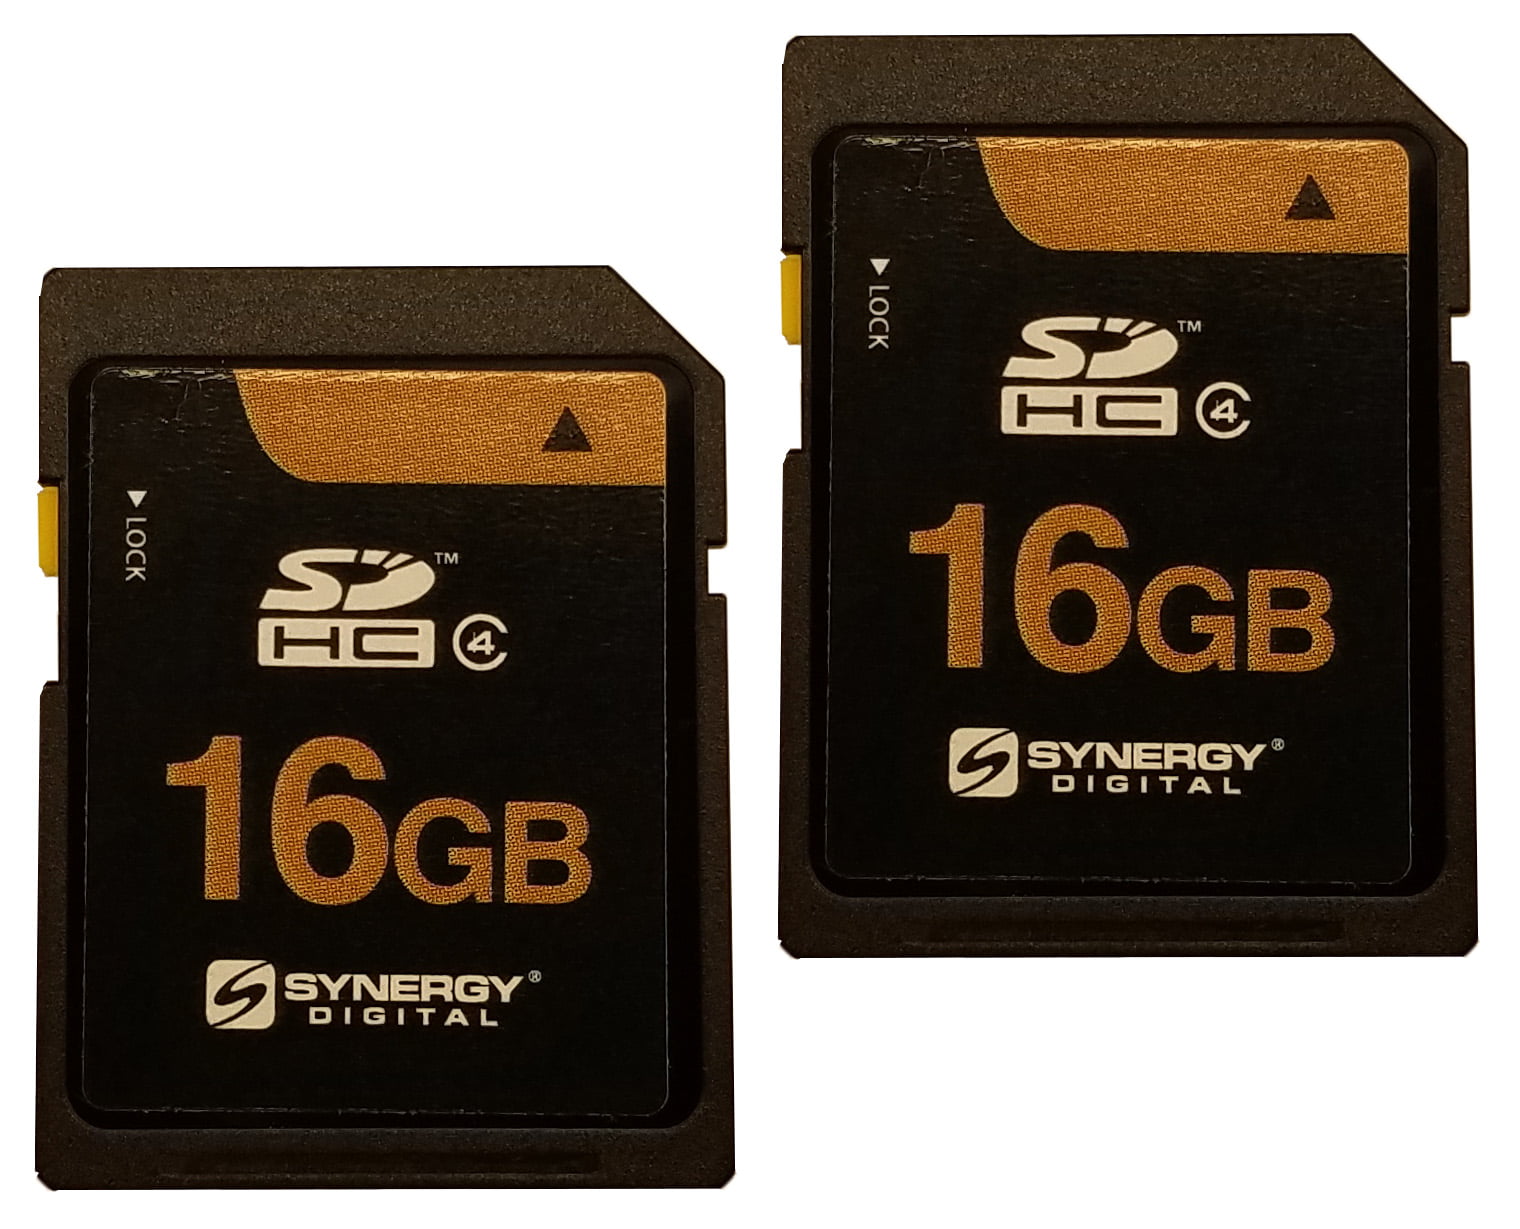 Extreme SDHC 16GB Class 10 2-Pack 